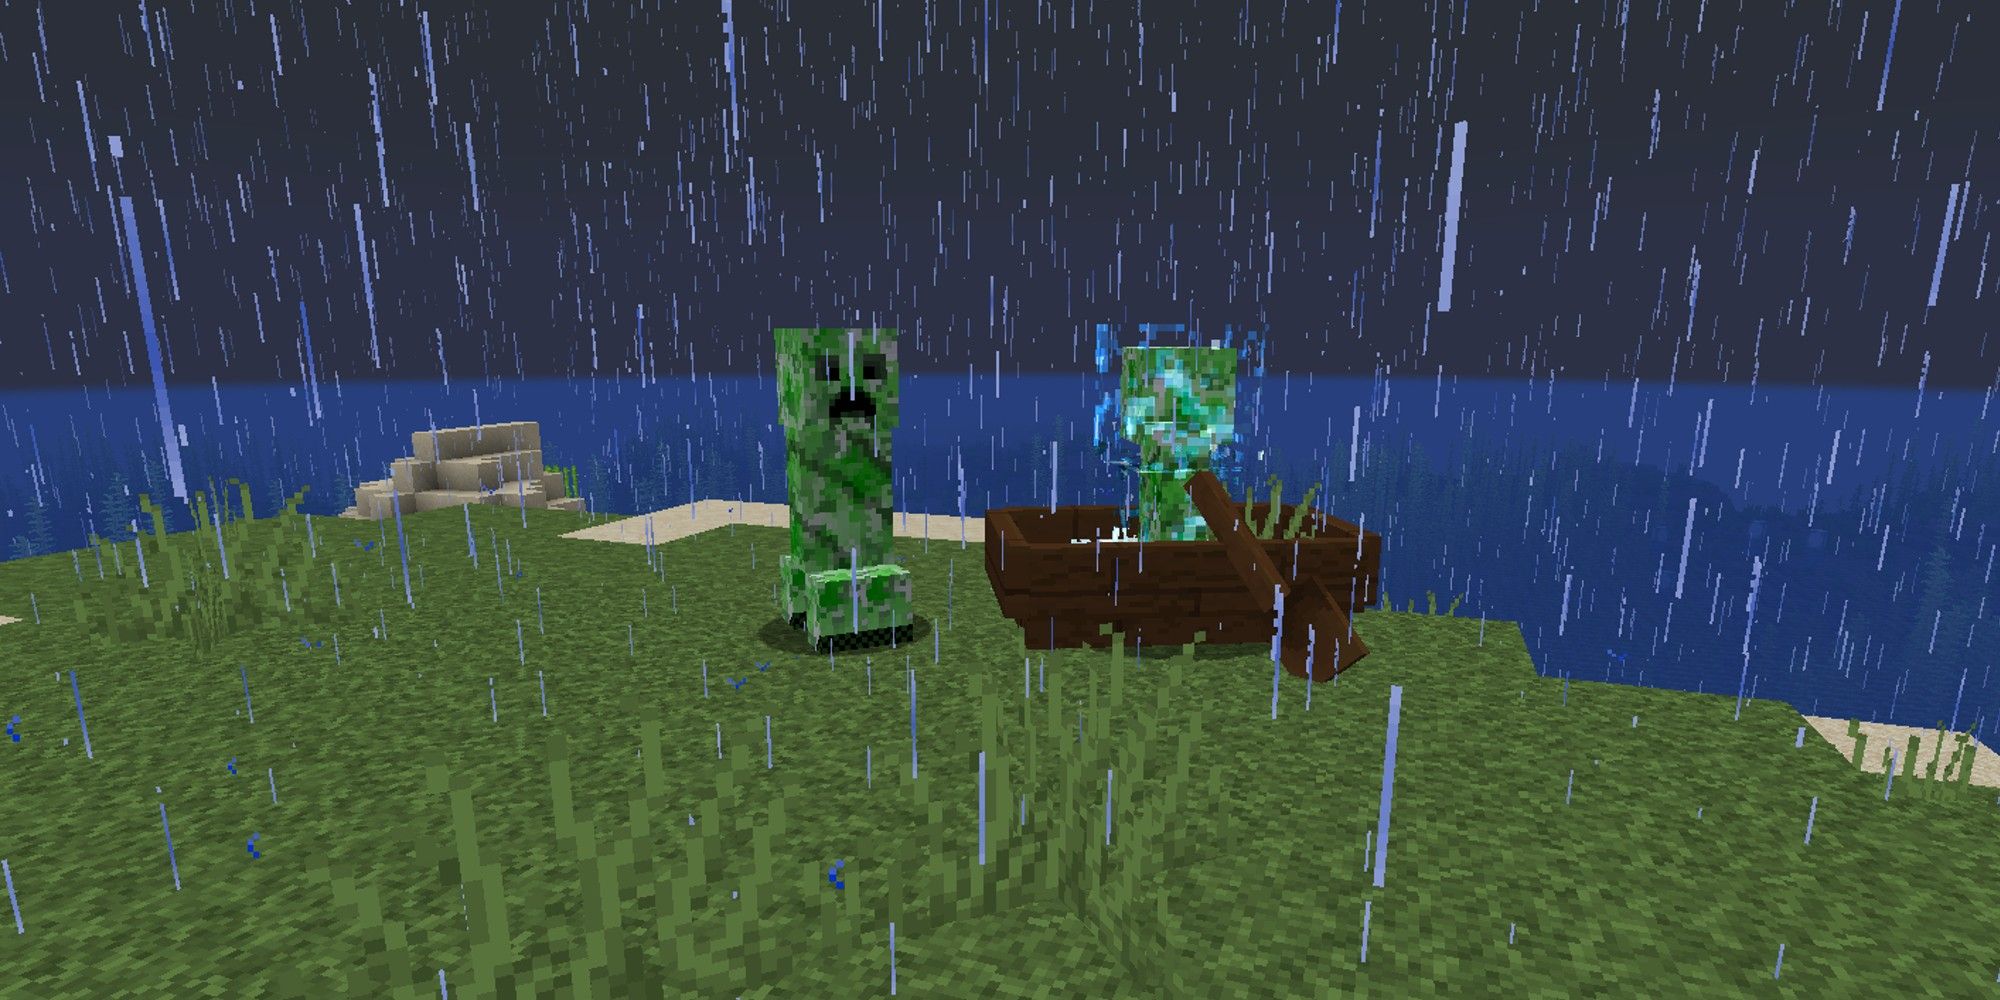 creeper standing next to charged creeper in a boat